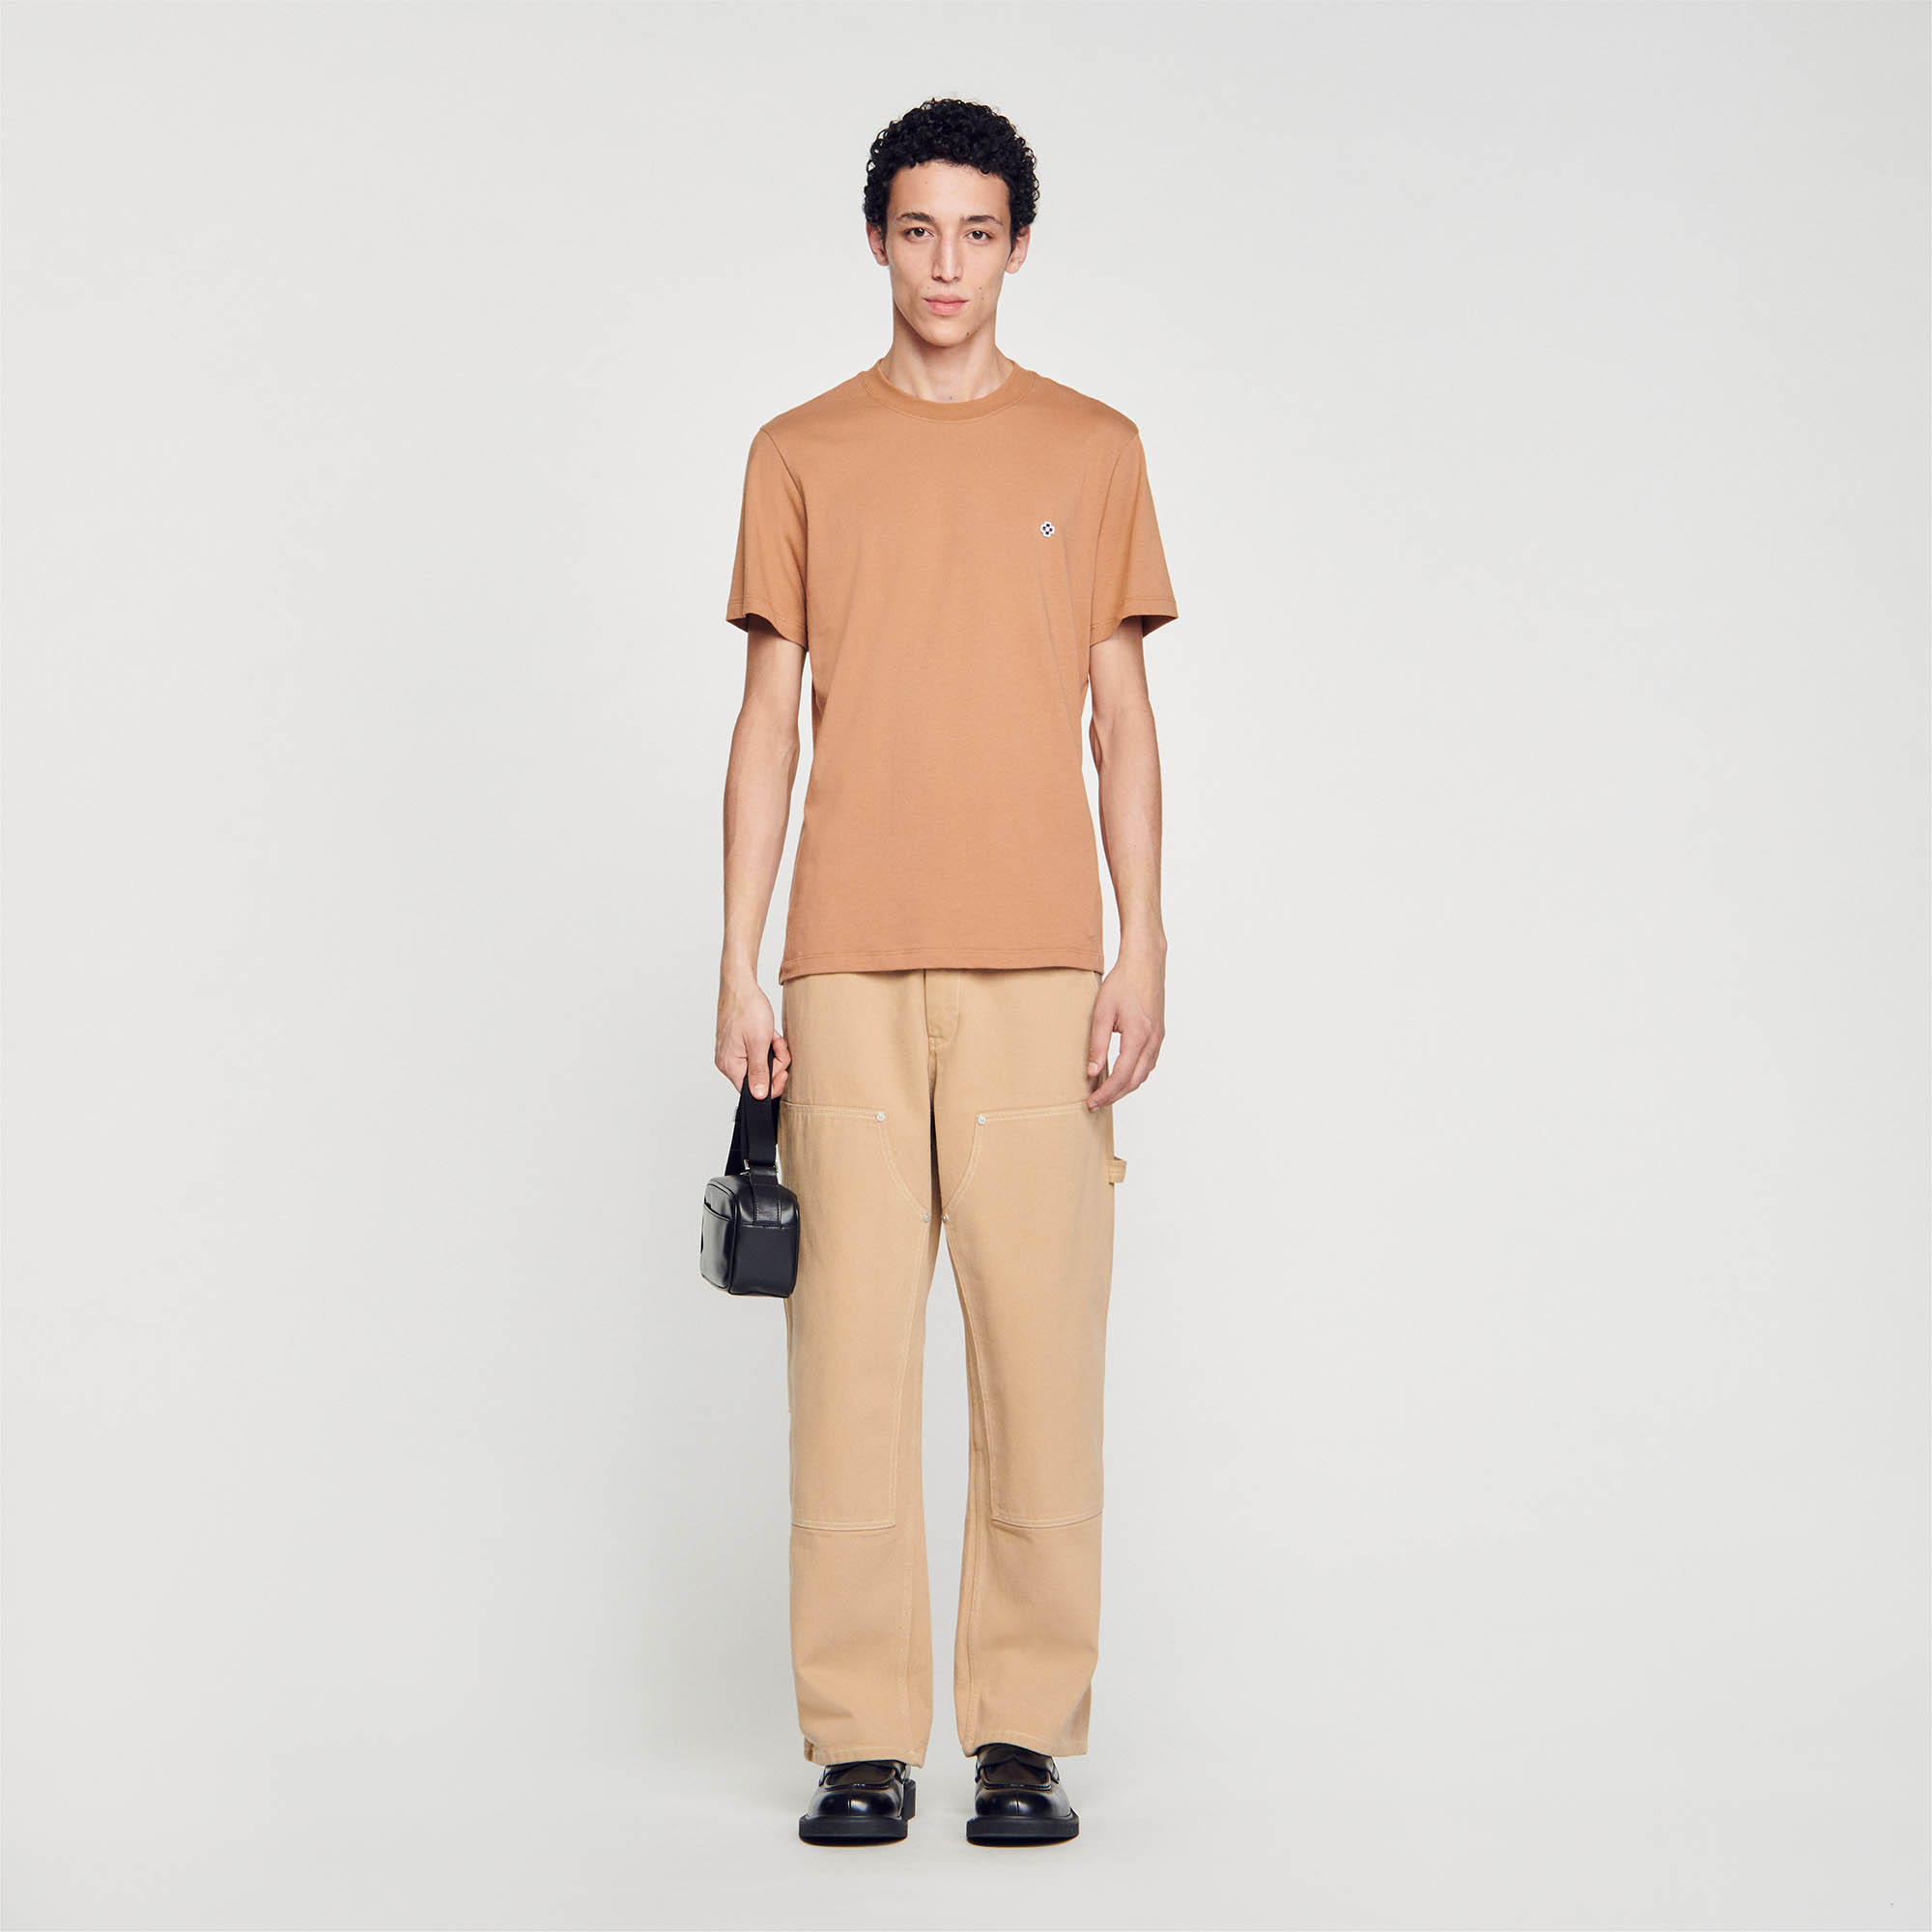 Sandro cotton T-shirt with Square Cross patch